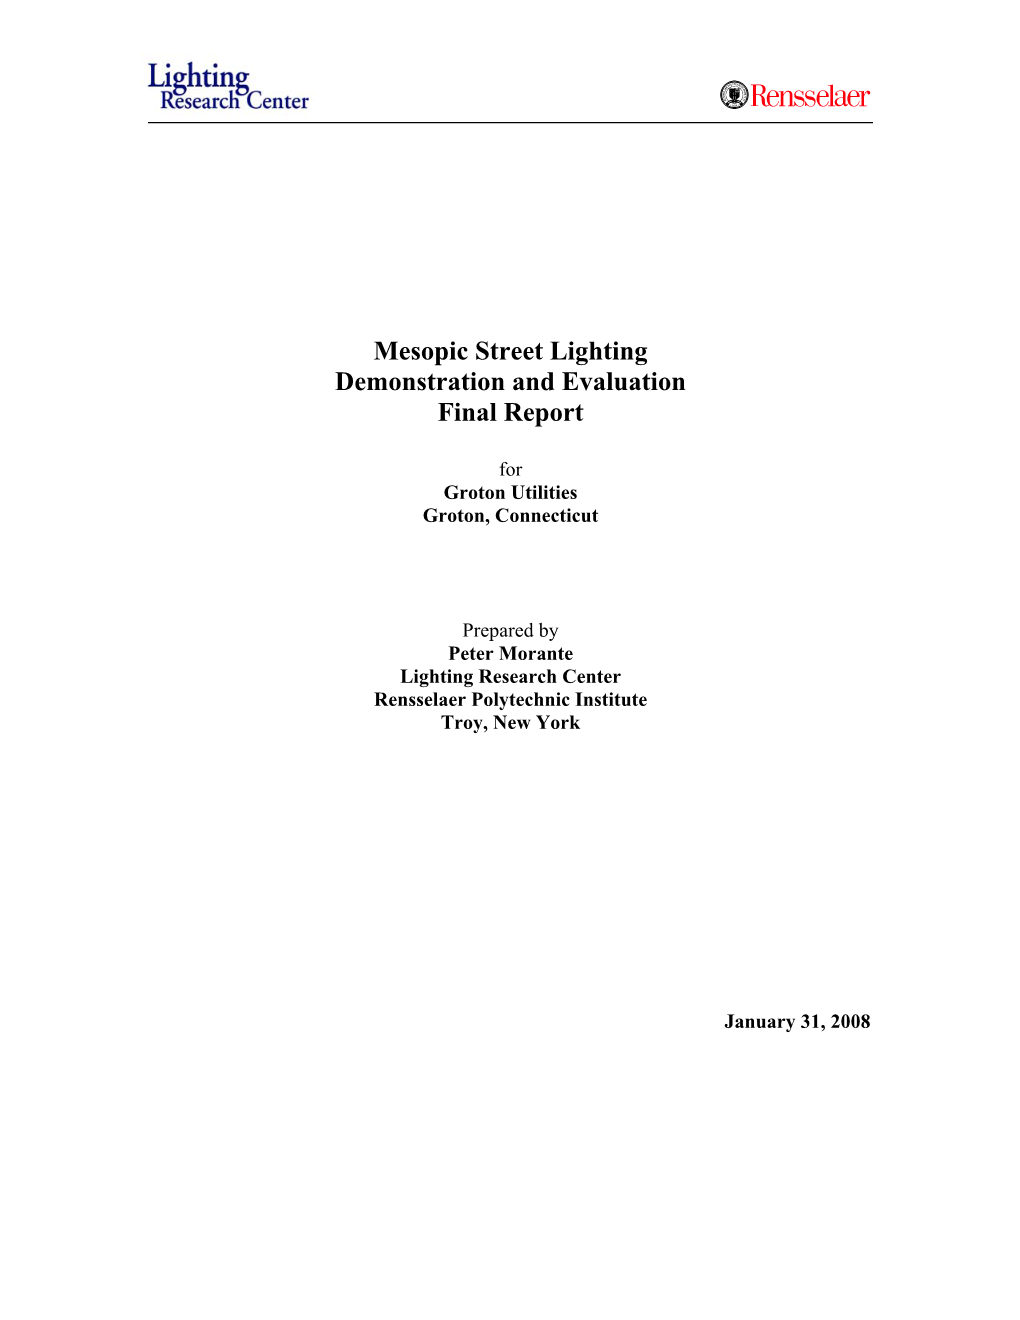 Mesopic Street Lighting Demonstration and Evaluation Final Report